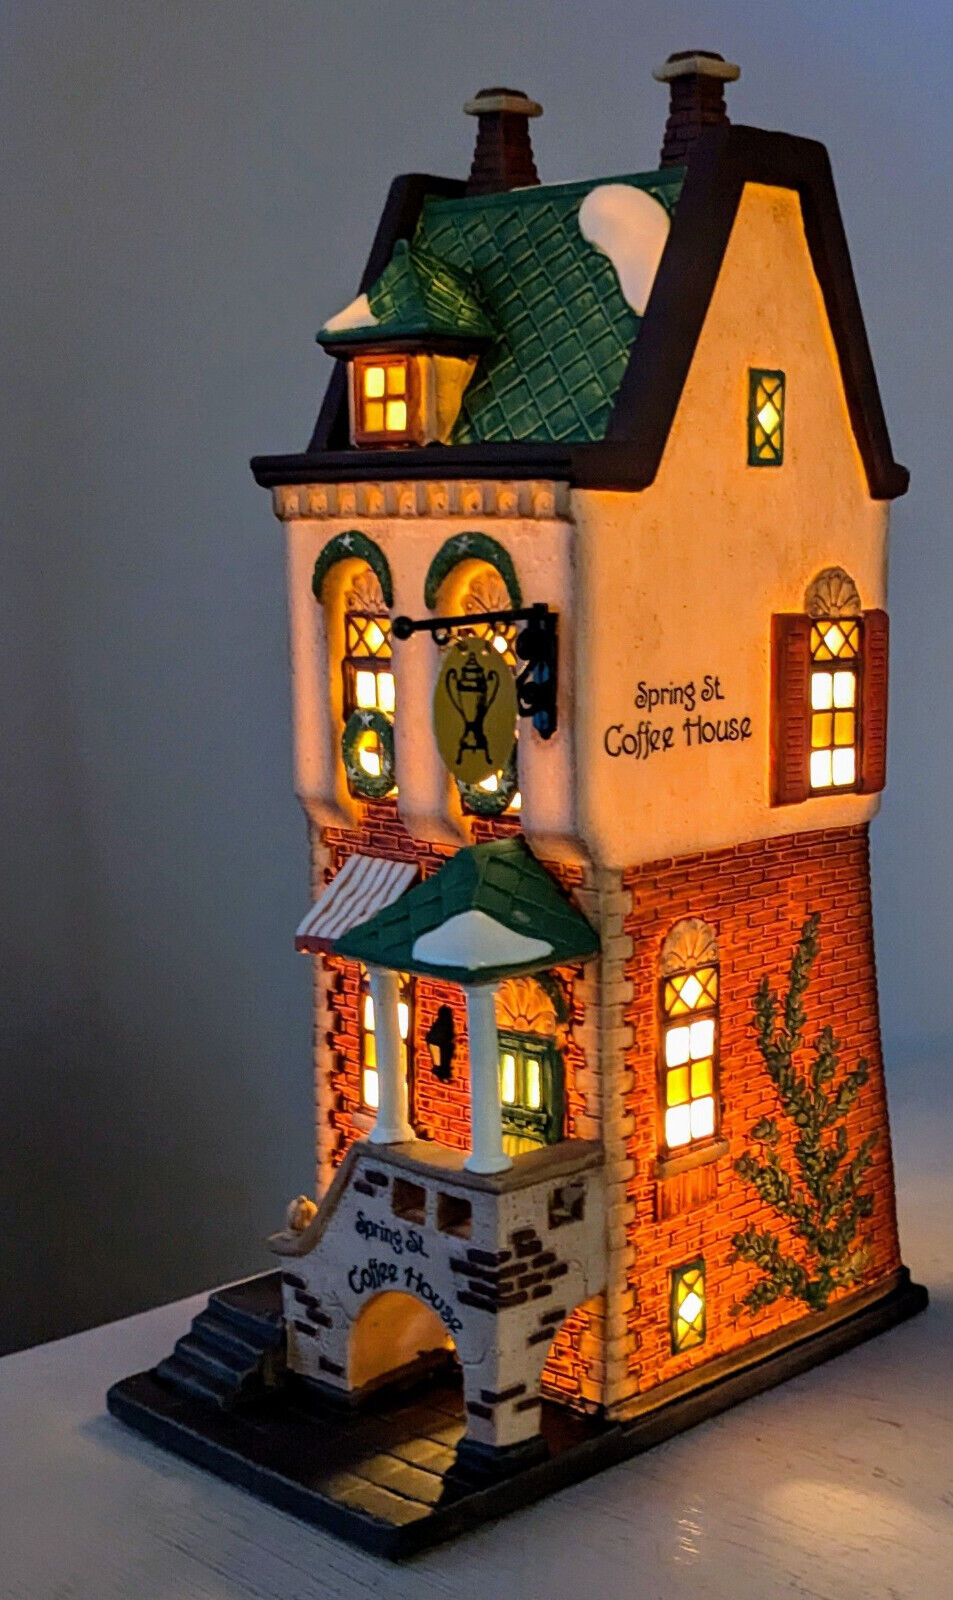 Dept 56 Christmas in the City “SPRING ST COFFEE HOUSE” Heritage Village #5880-7